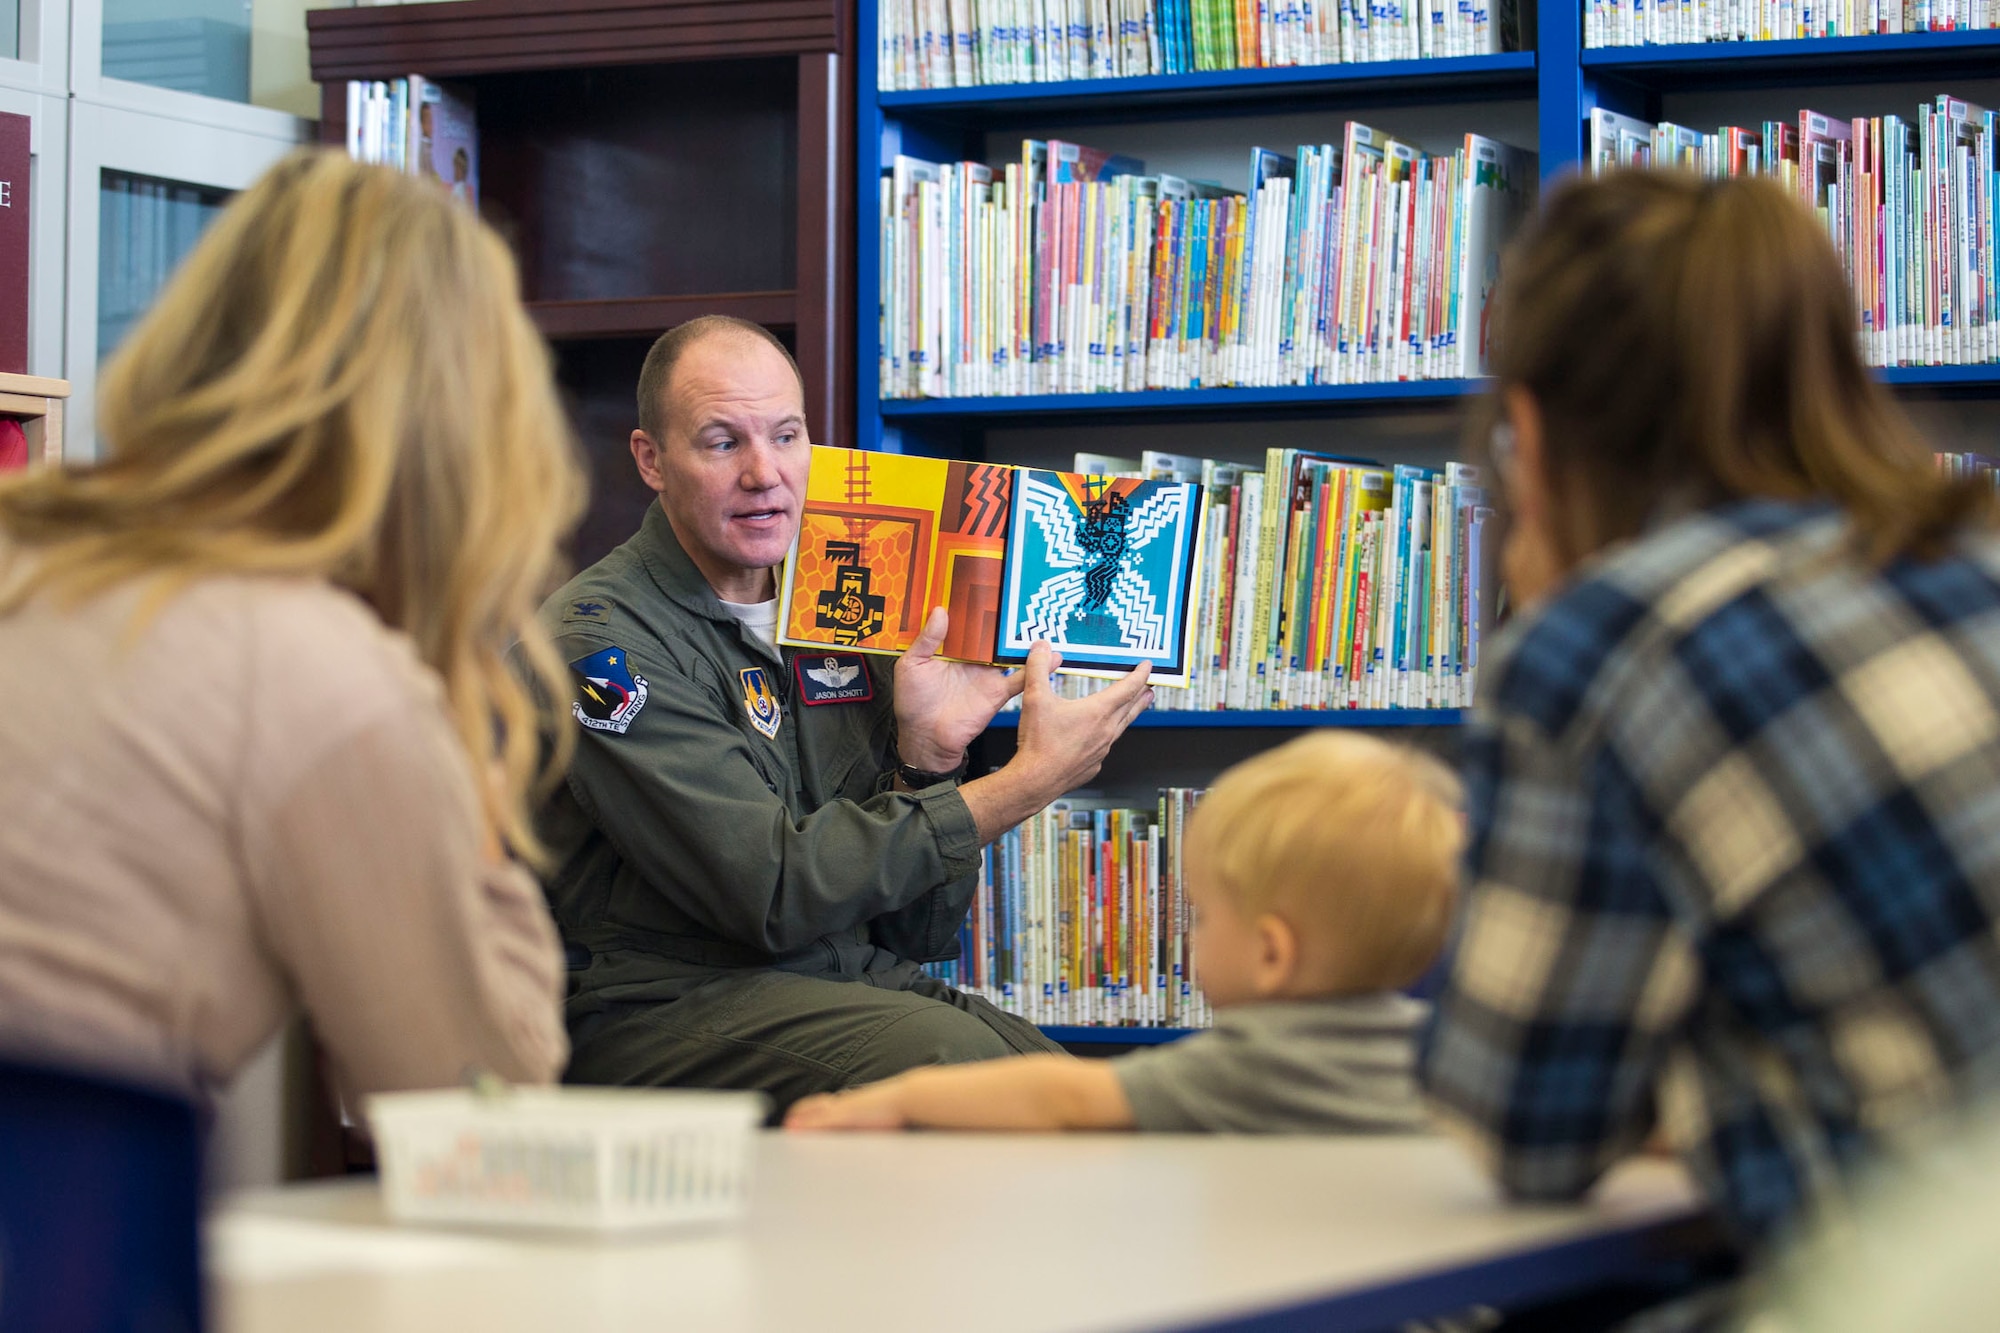 The 412th Test Wing and NASA Armstrong Flight Research Center kicked off Native American Heritage Month at the base library Nov. 1. (U.S. Air Force photo by Christian Turner)